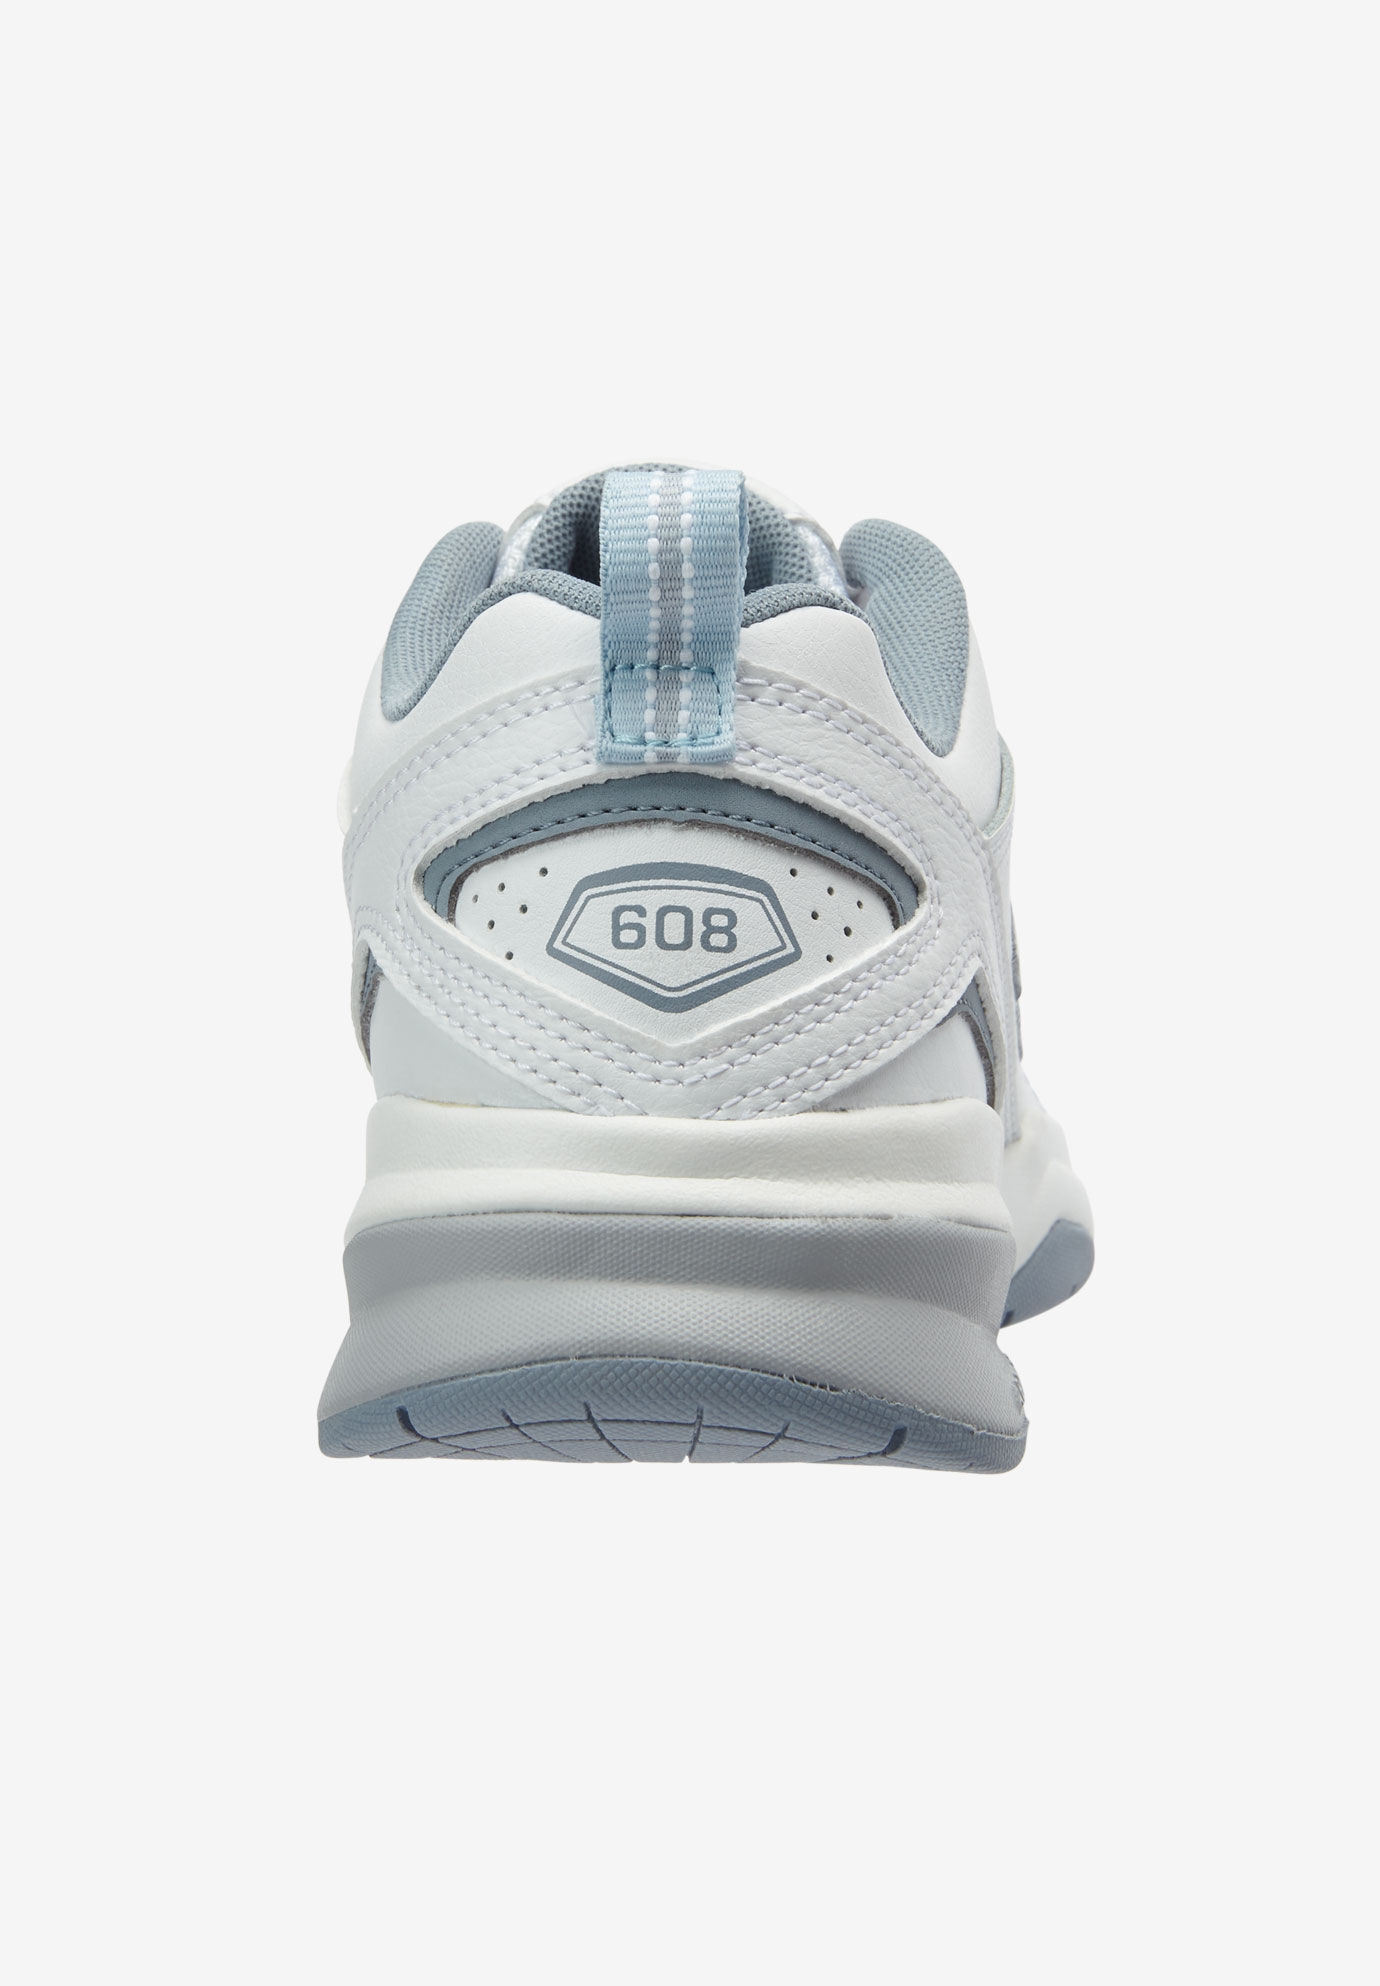 wx68 sneaker by new balance